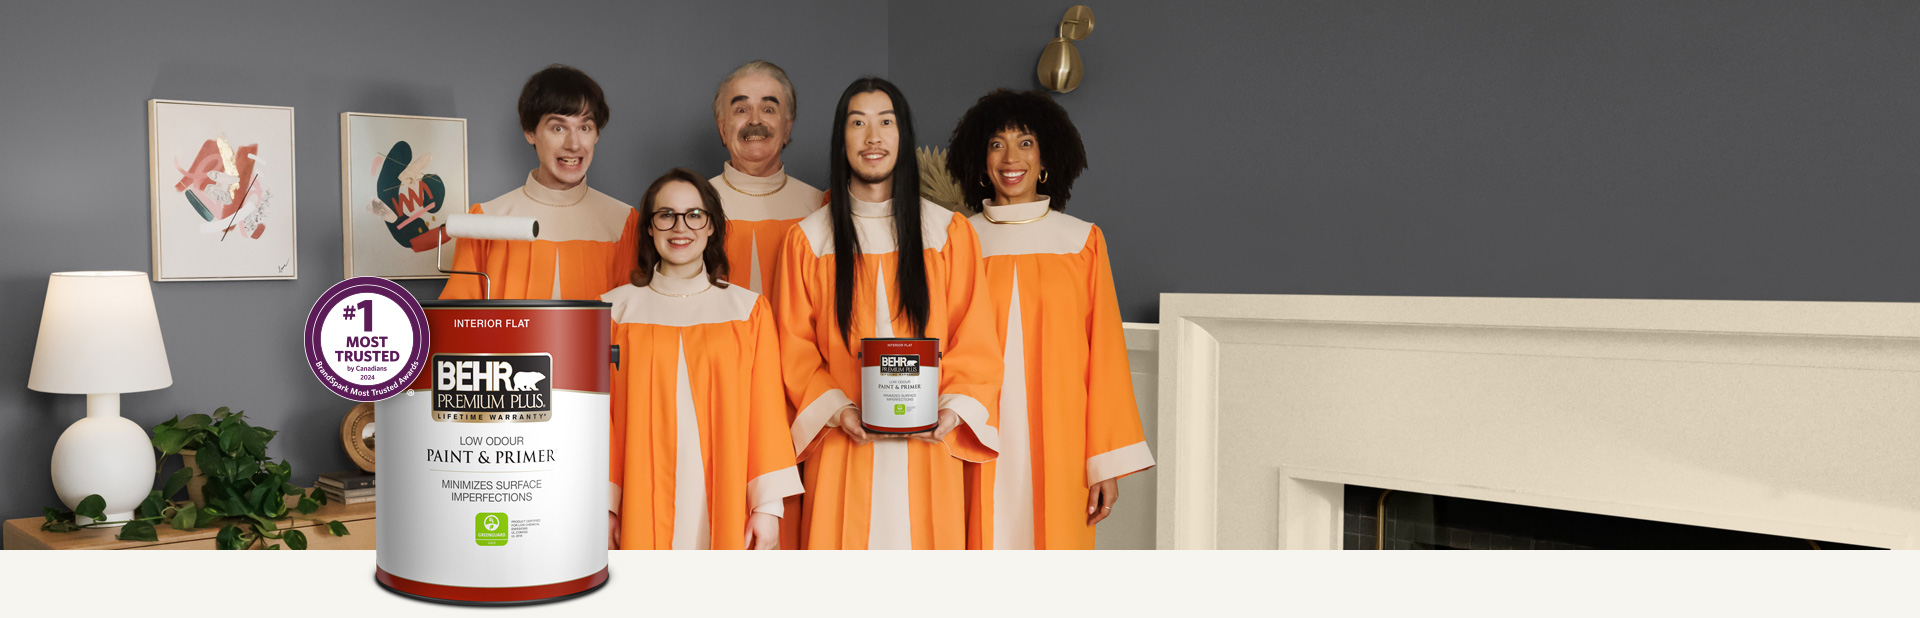 Choir standing in a painted living room and holding a can of Behr Premium Plus Interior Flat Paint